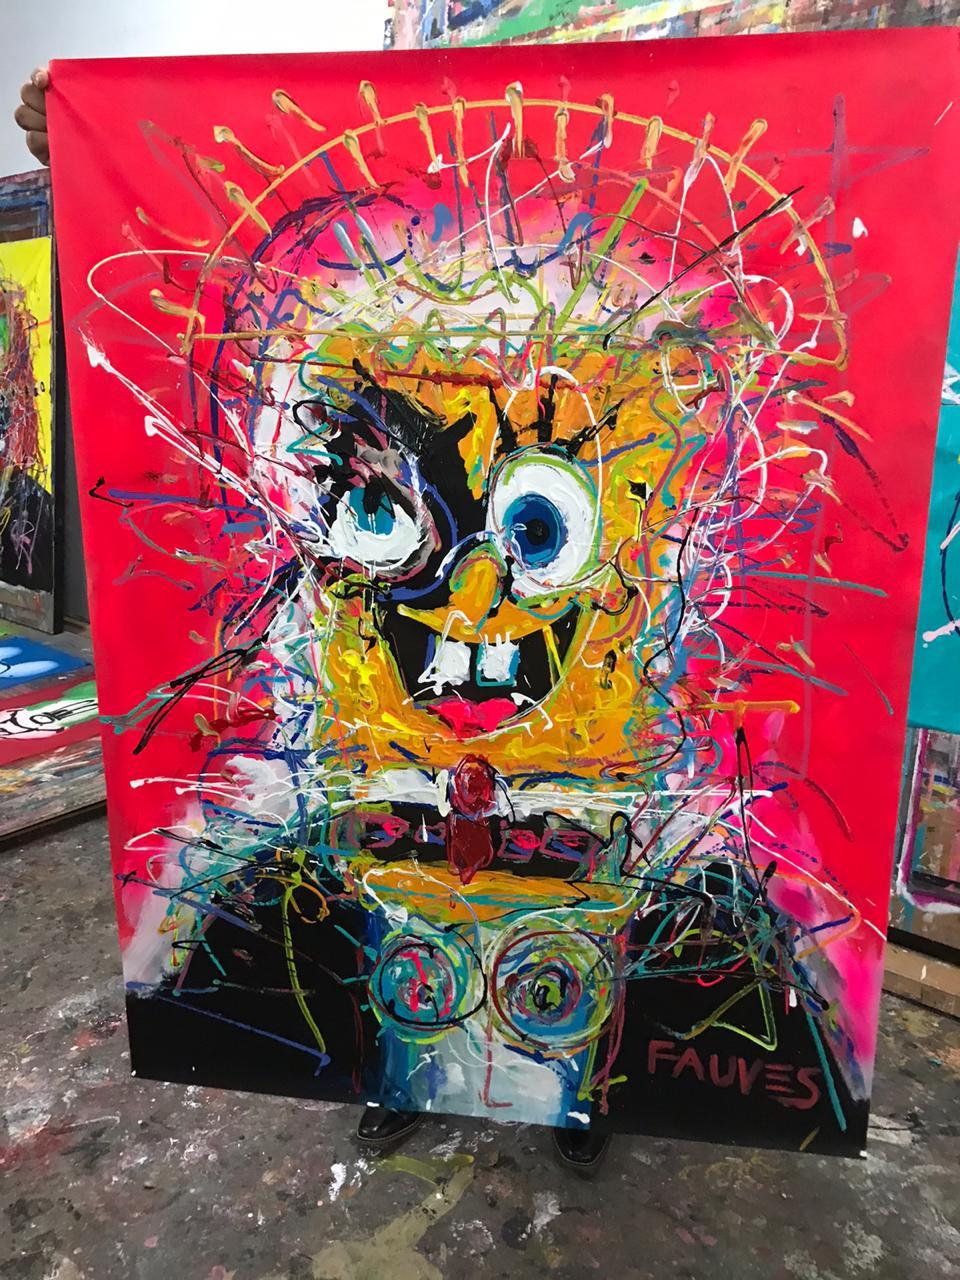 Bob the Mona - Painting by Le Fauves